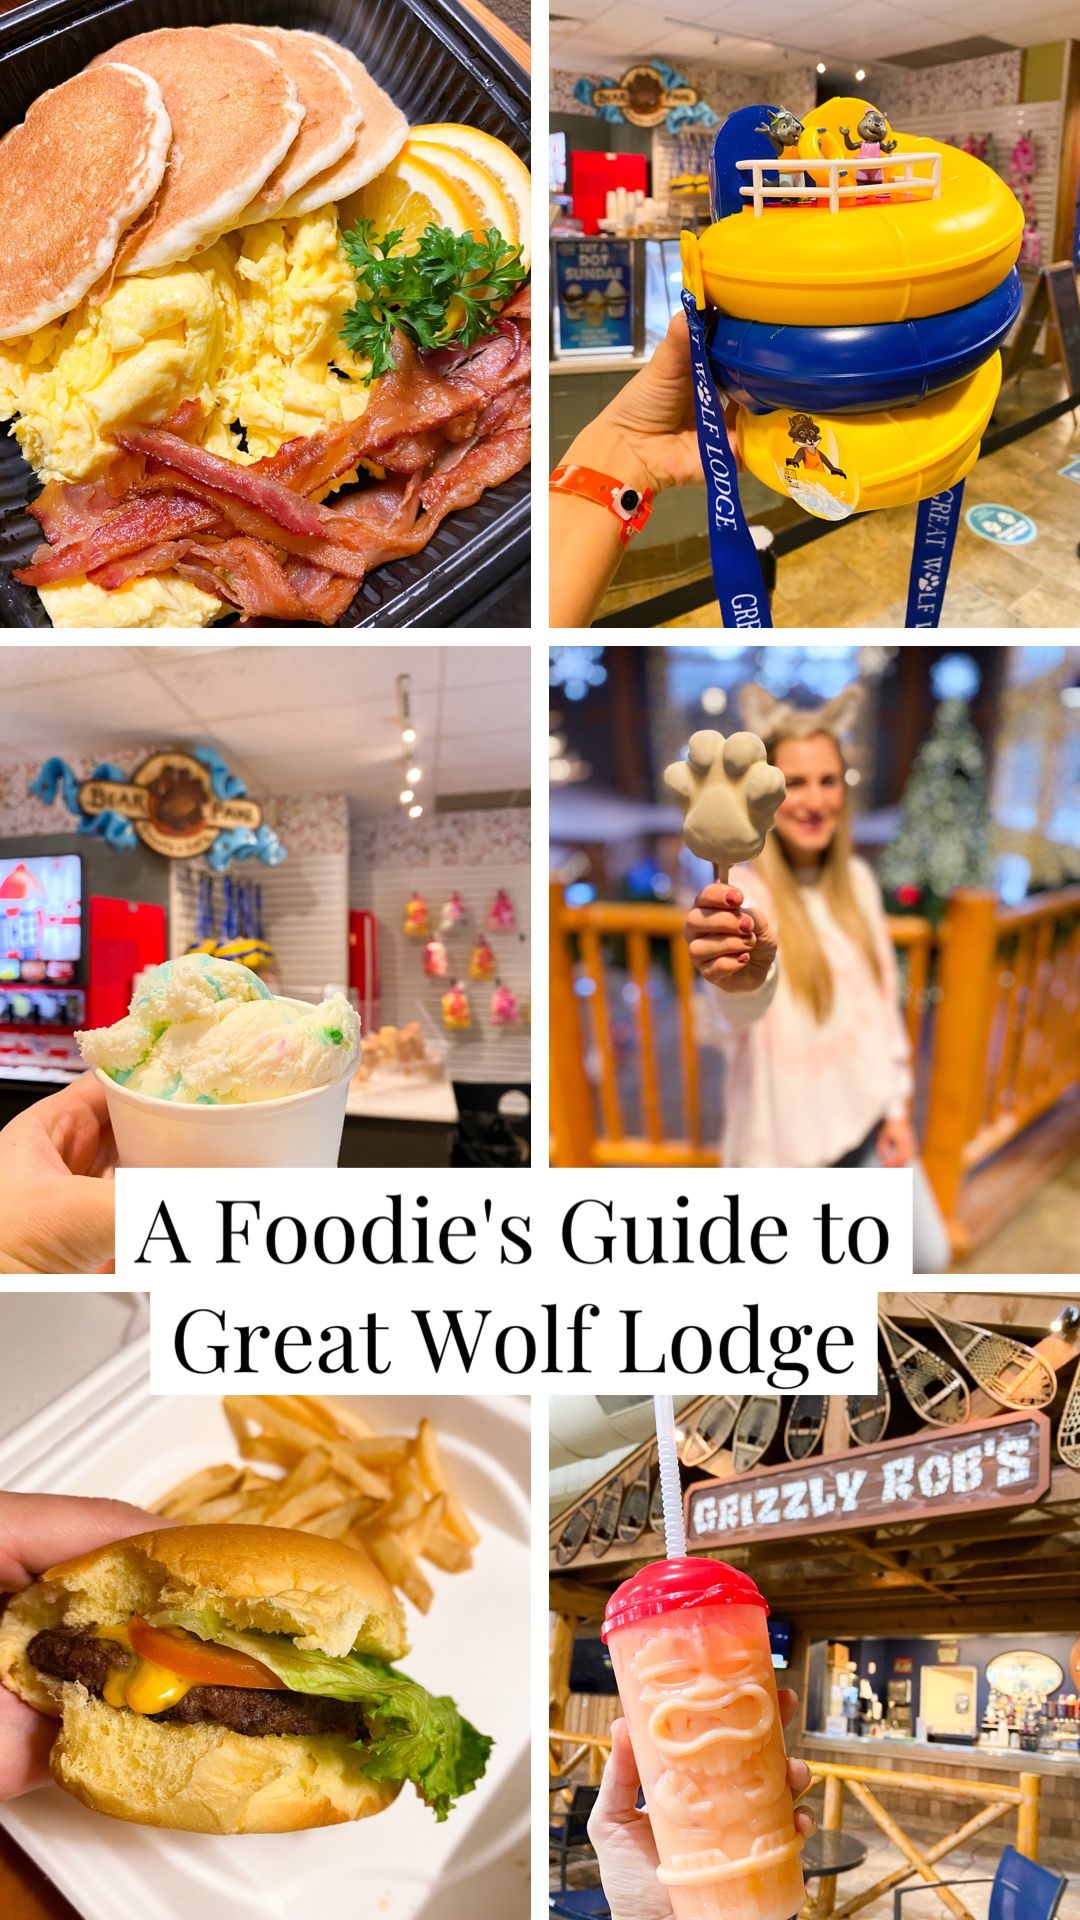 A Foodie’s Guide to Great Wolf Lodge